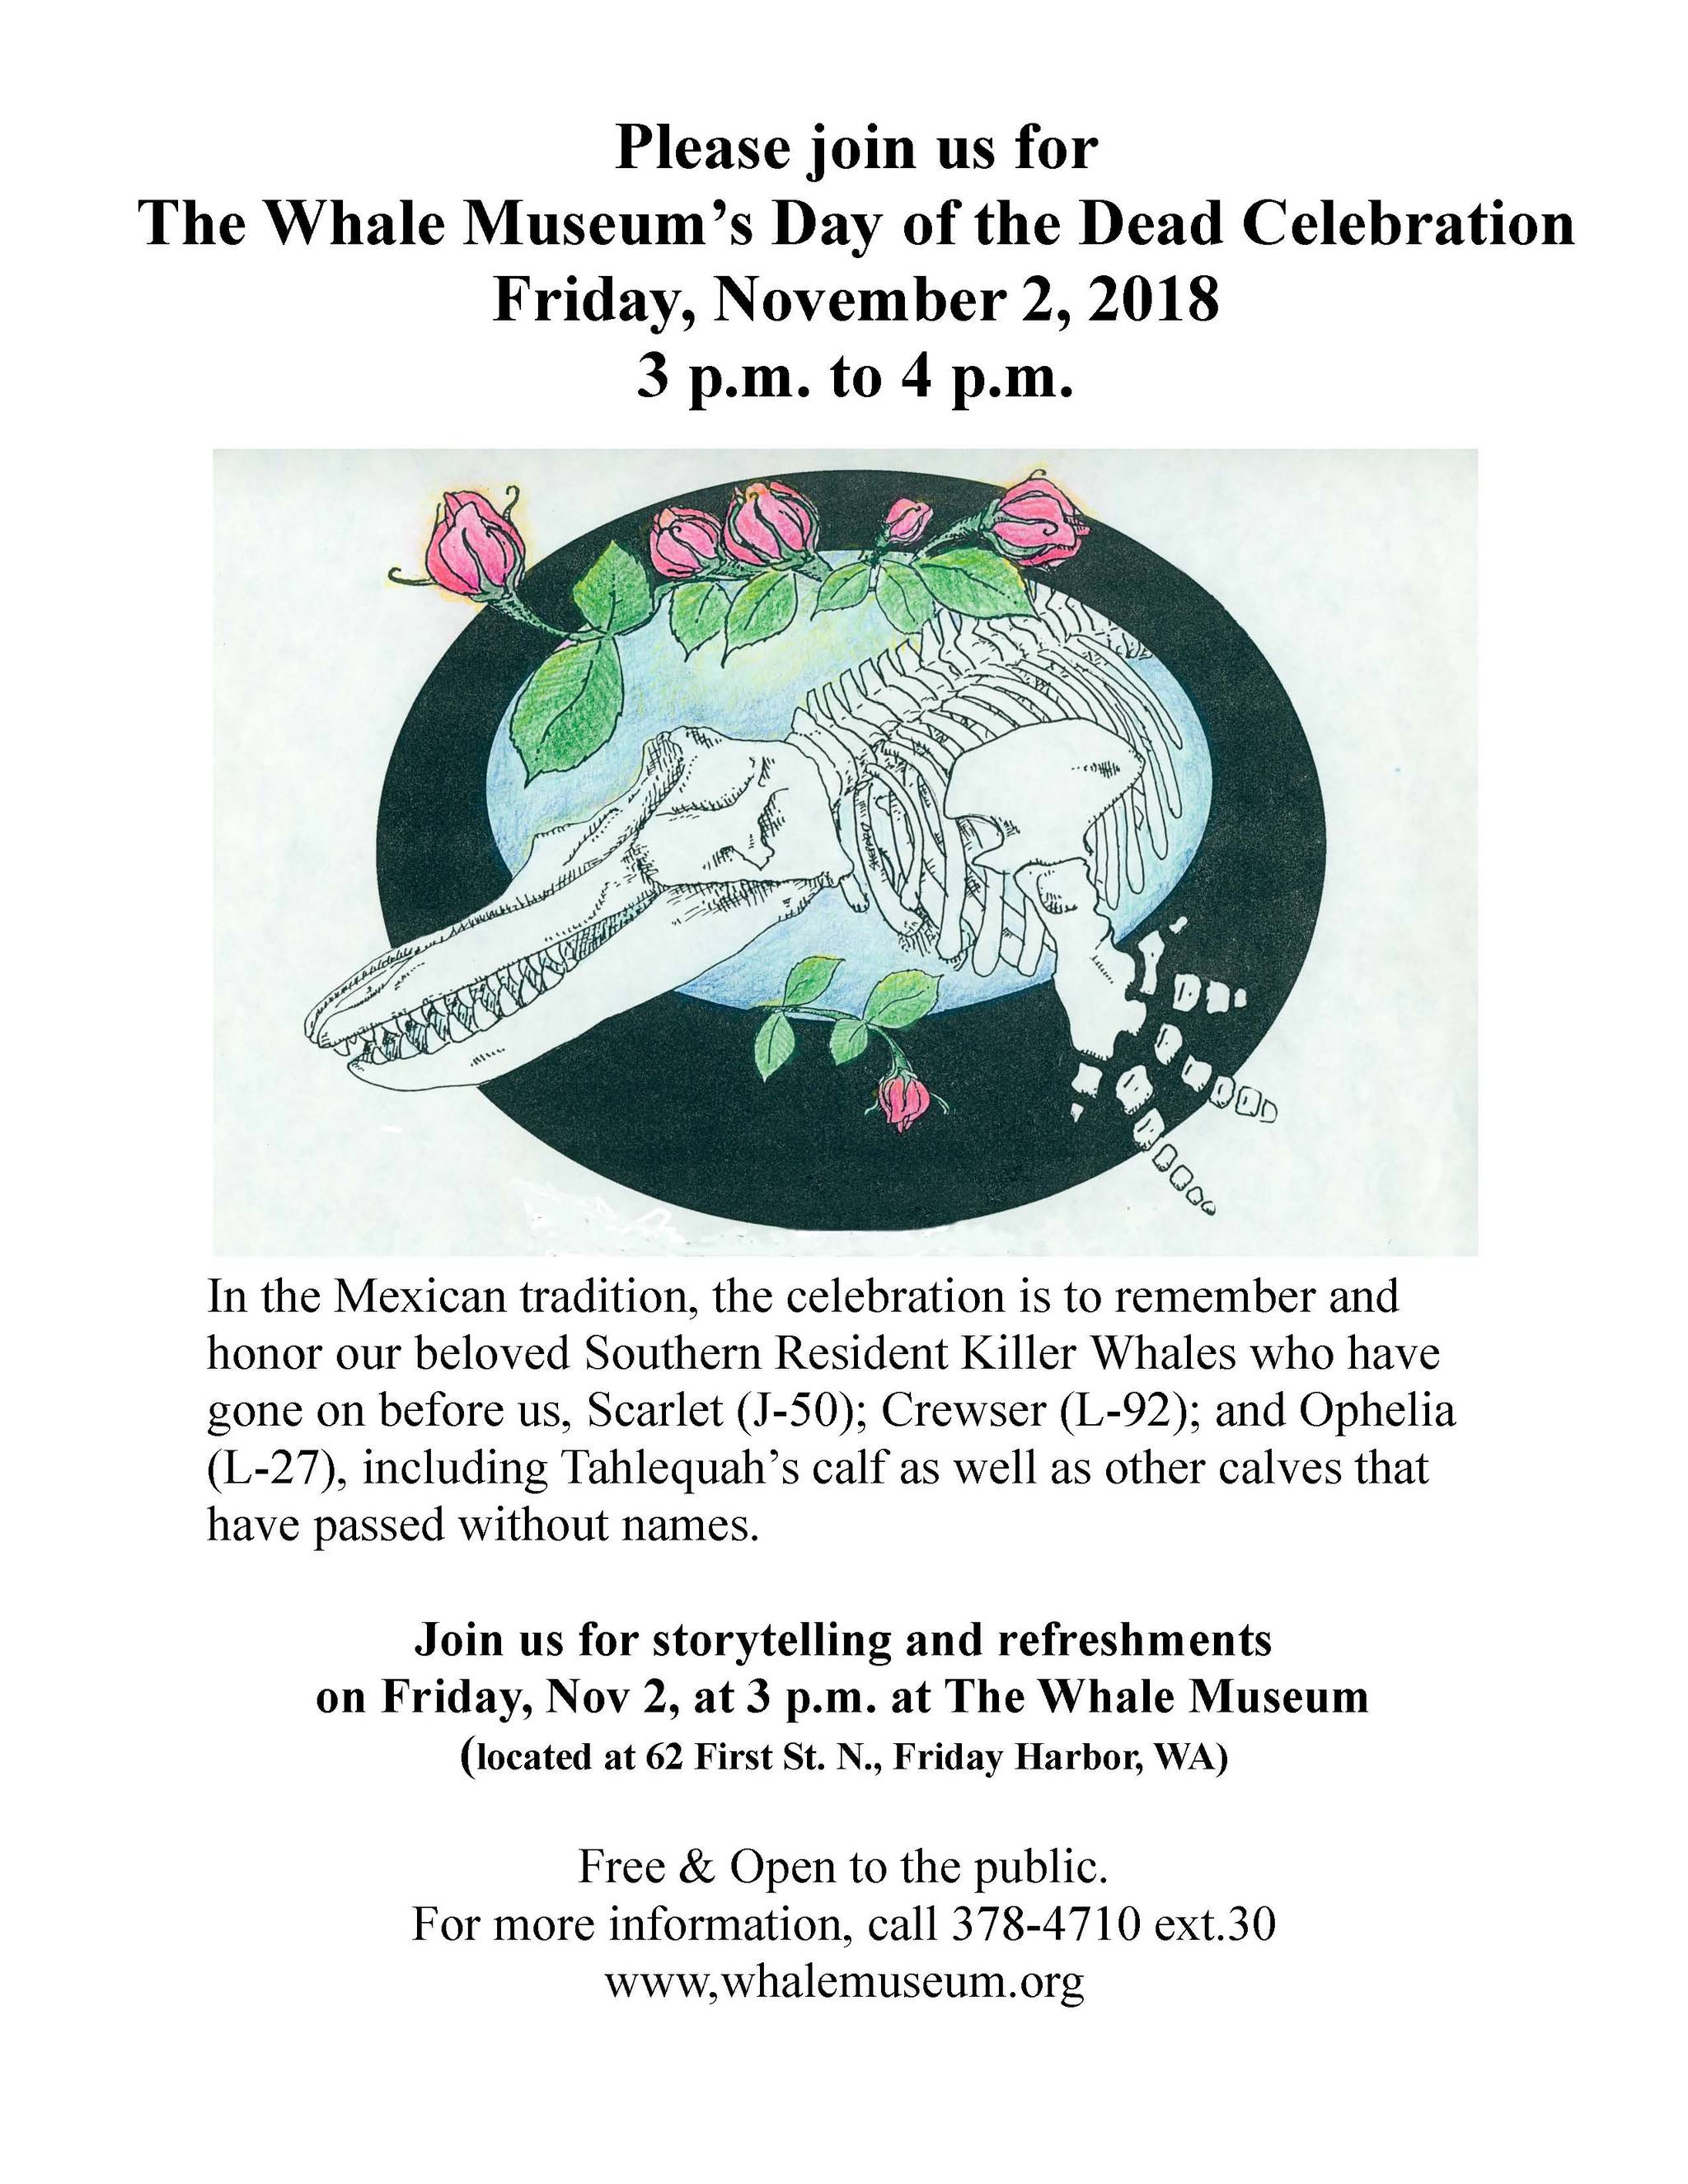 Day of the Dead Remembrance at The Whale Museum